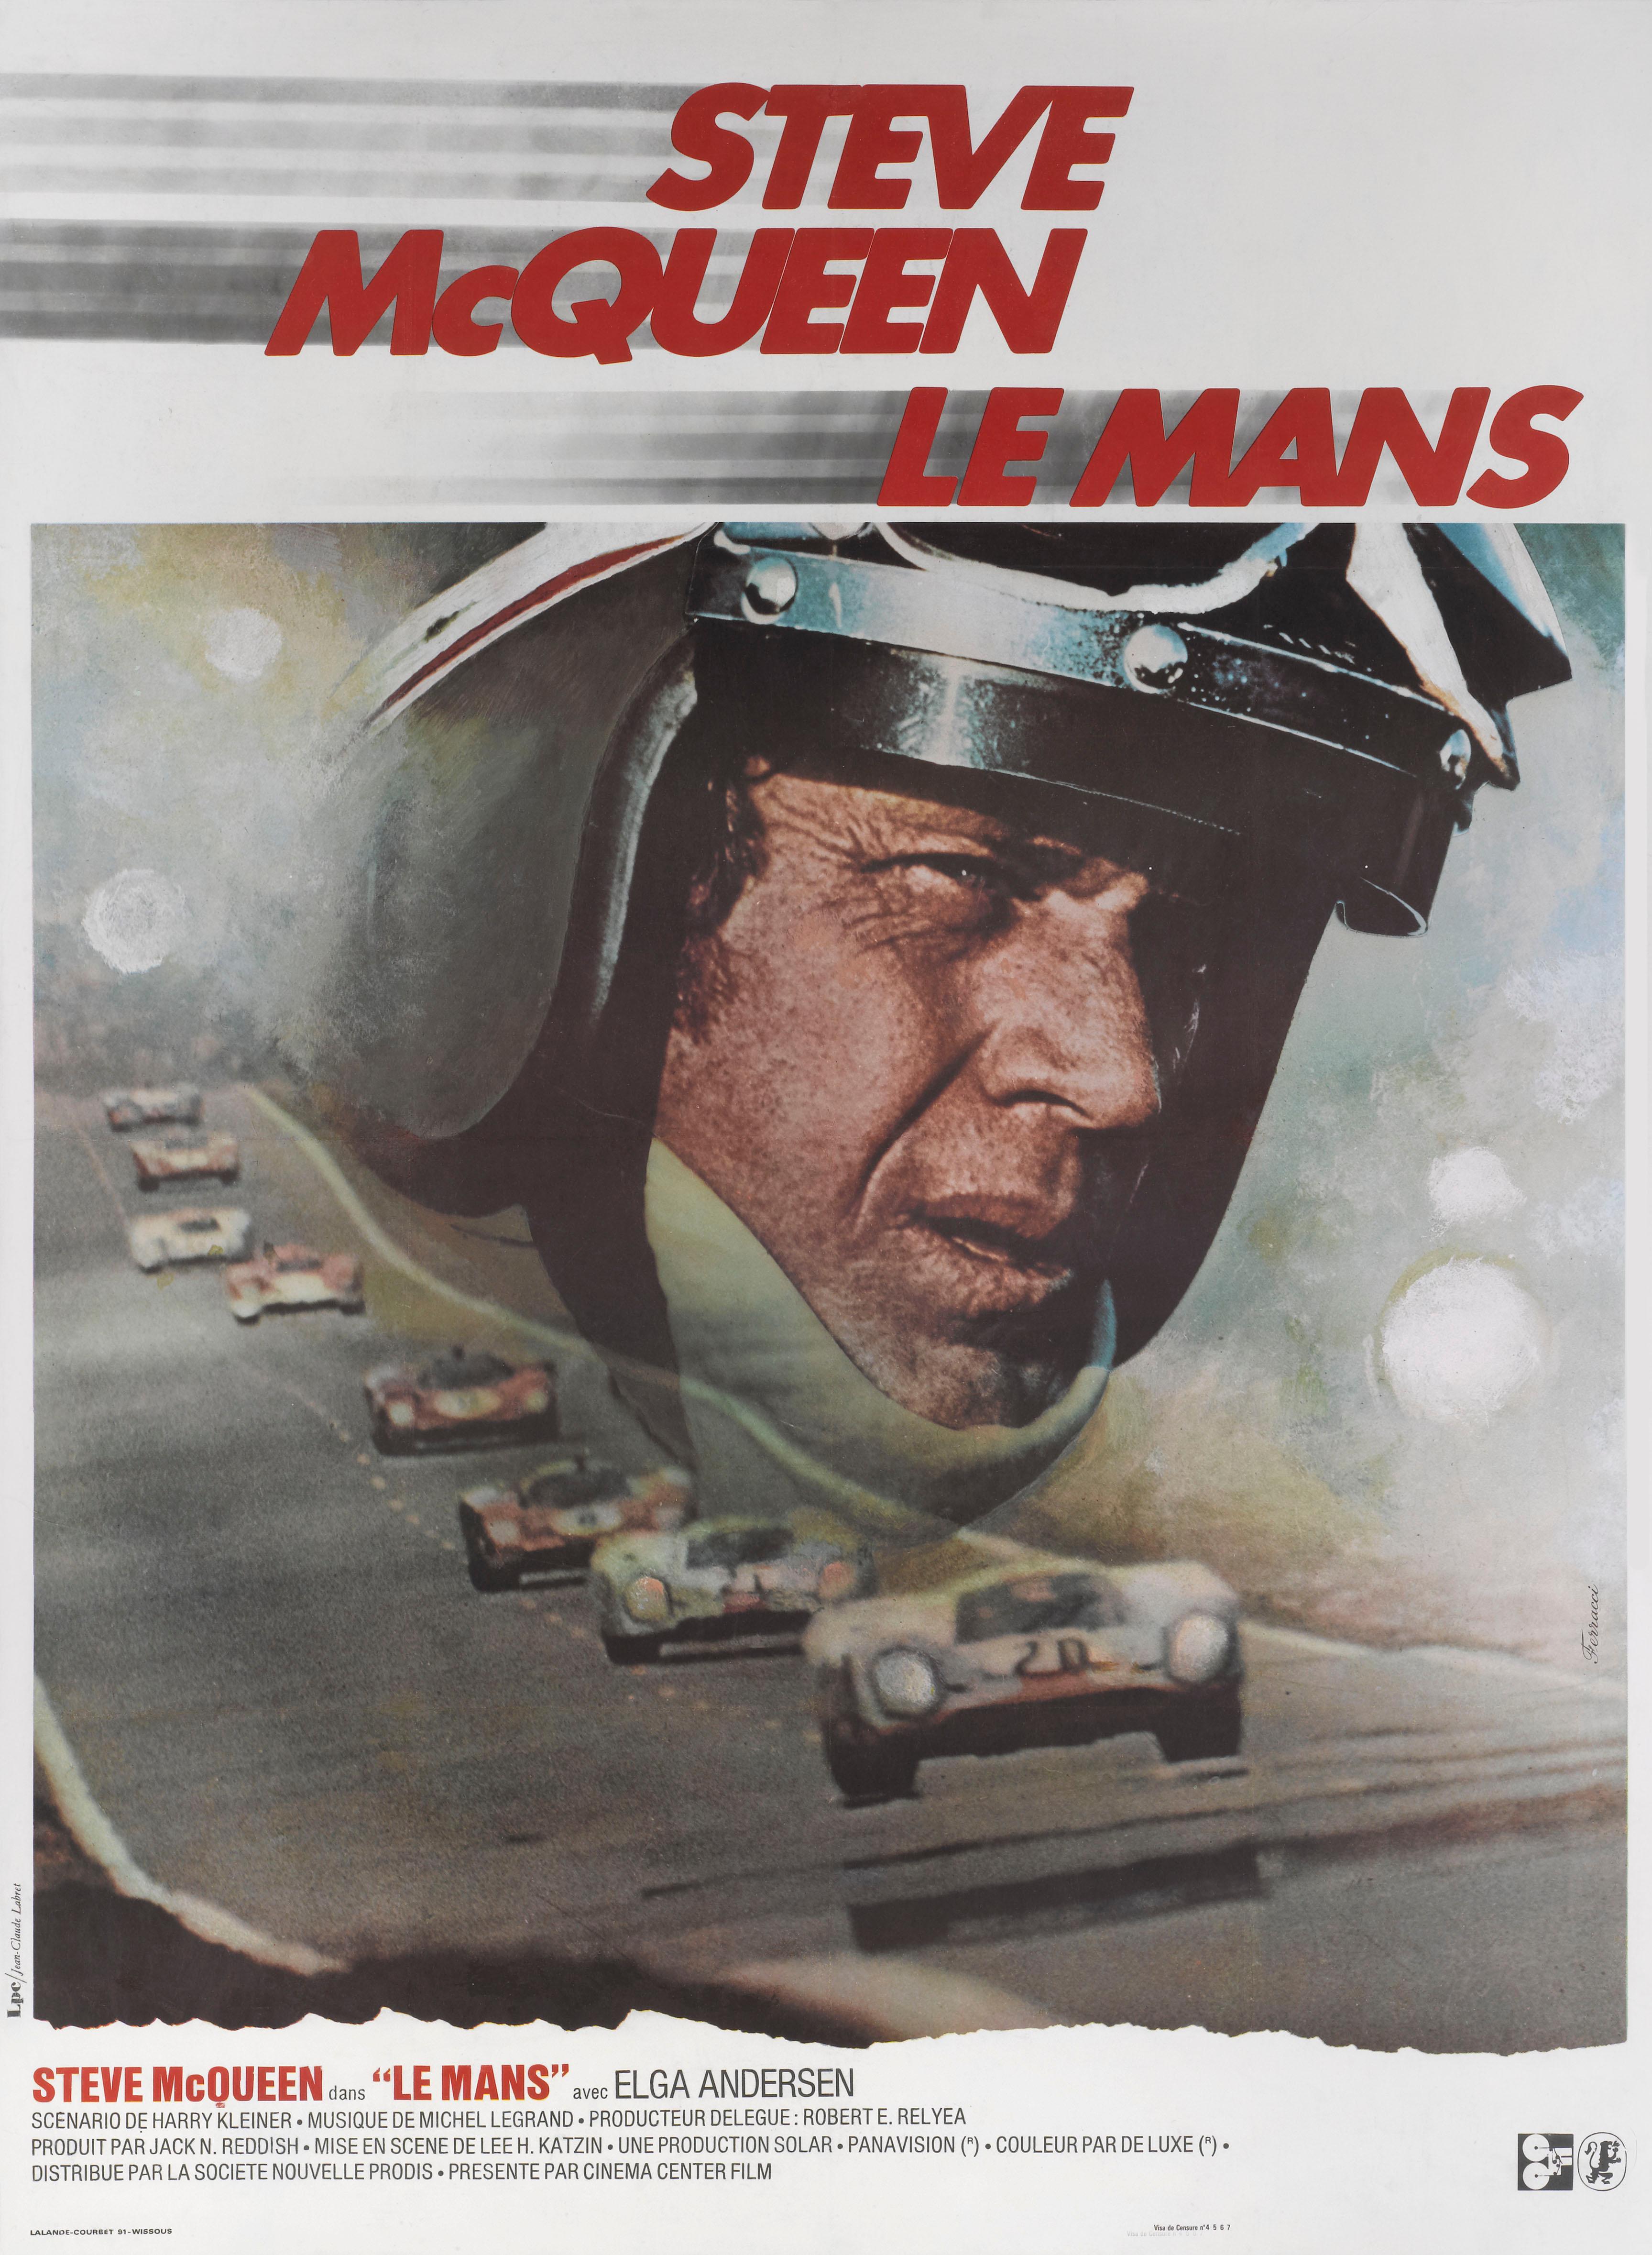 Original French film poster from the Classic 1971 Steve McQueen racing film. 
This film, directed by Lee H. Katzin, portrays the famous Le Mans 24 Hour endurance motor race, and stars Steve McQueen. It was shot on location at the Le Mans circuit